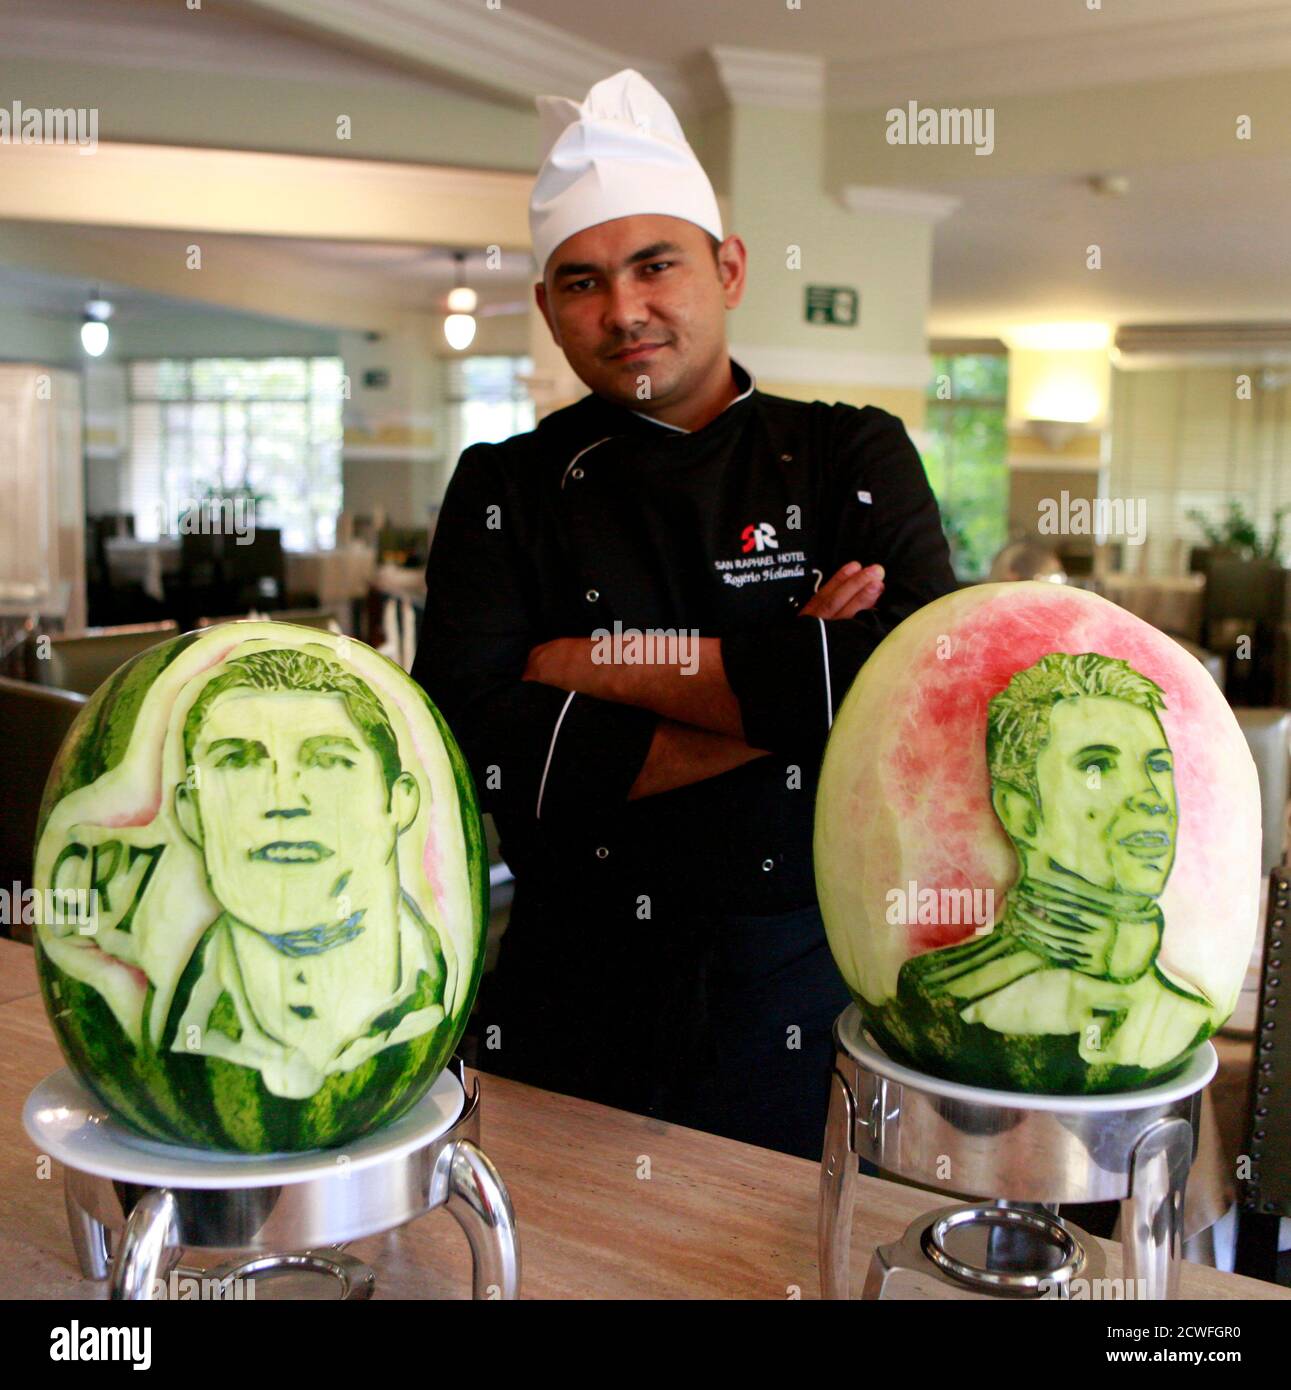 Chef Rogerio Holanda poses with carvings of Portugal's soccer player Cristiano Ronaldo which he made in watermelons at San Raphael hotel in Sao Paulo May 7, 2014. The 2014 World Cup will be held in Brazil from June 12 to July 13. REUTERS/Paulo Whitaker (BRAZIL - Tags: SPORT SOCCER WORLD CUP FOOD SOCIETY) Stock Photo